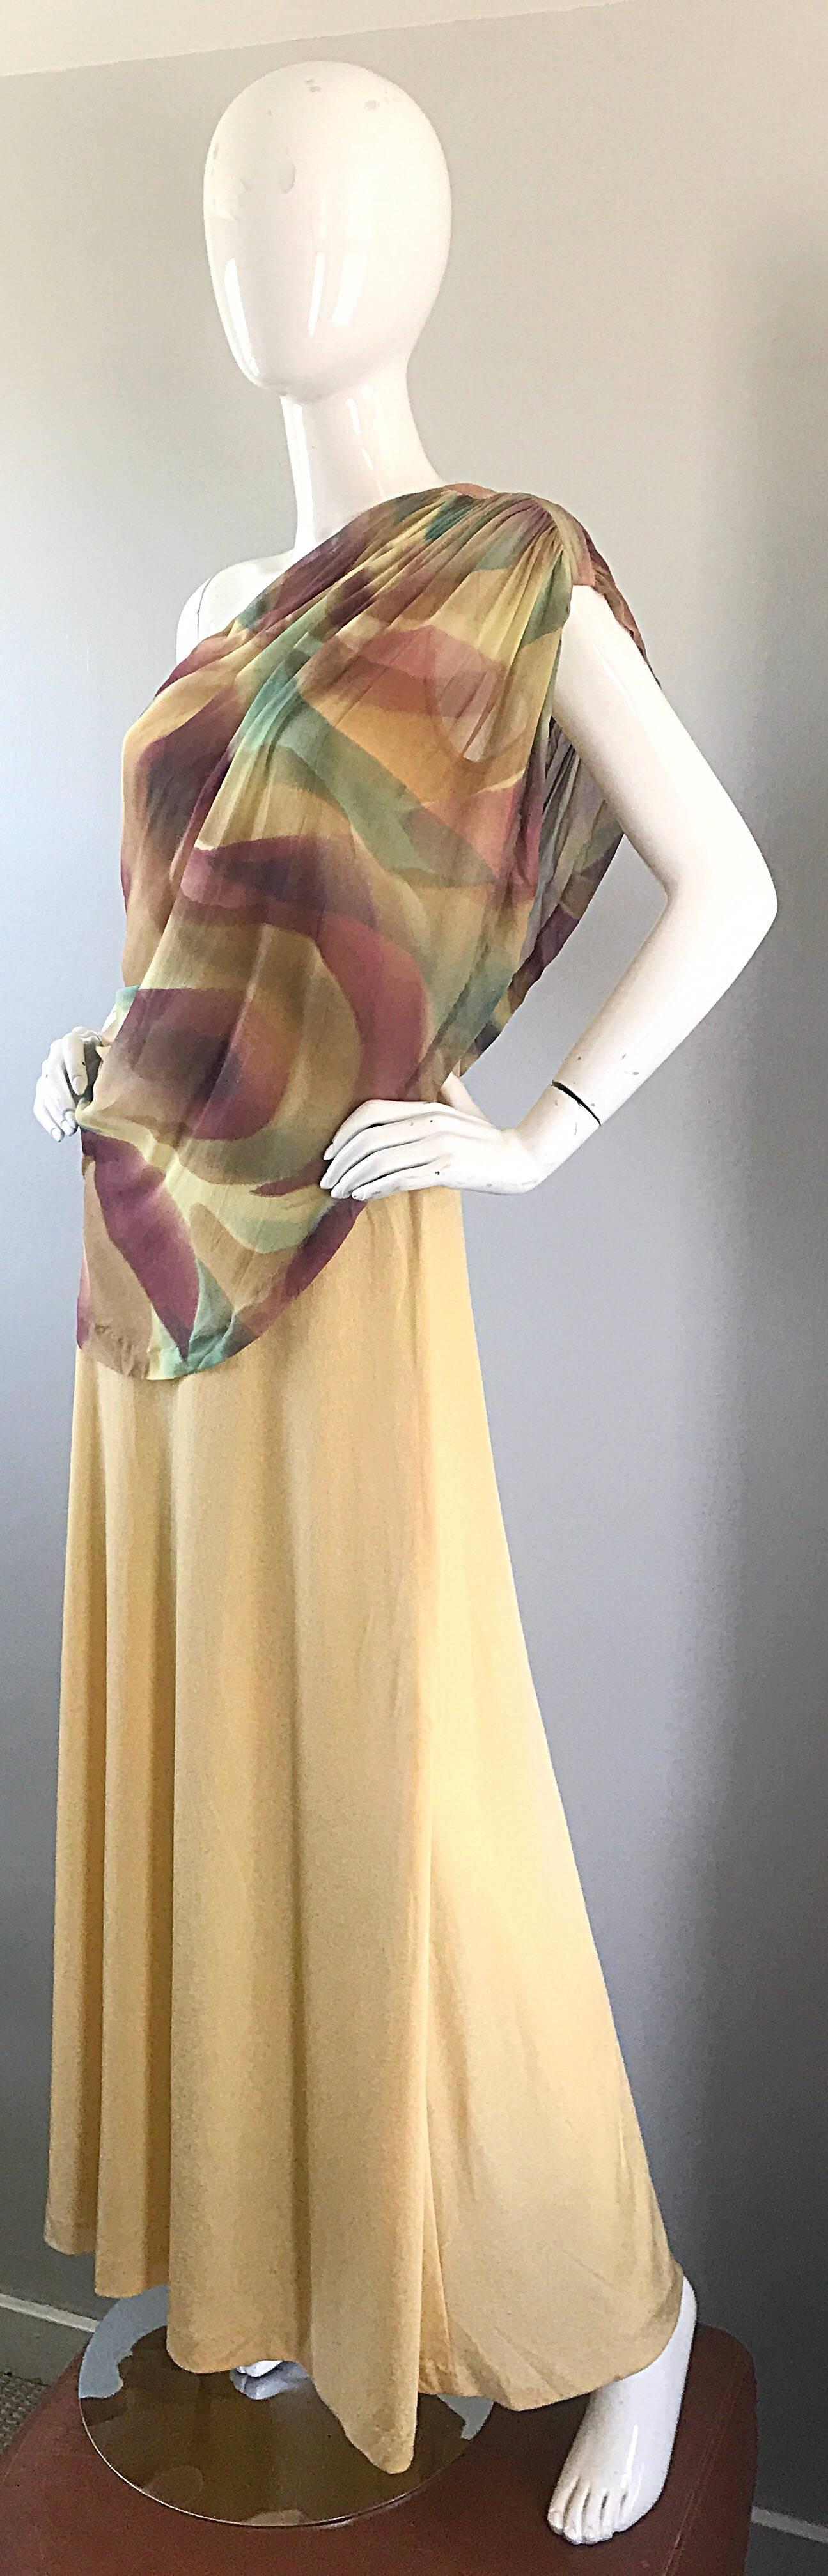 1970s Joy Stevens One Shoulder Gold Grecian Inspired 70s Vintage Gown Maxi Dress In Excellent Condition For Sale In San Diego, CA